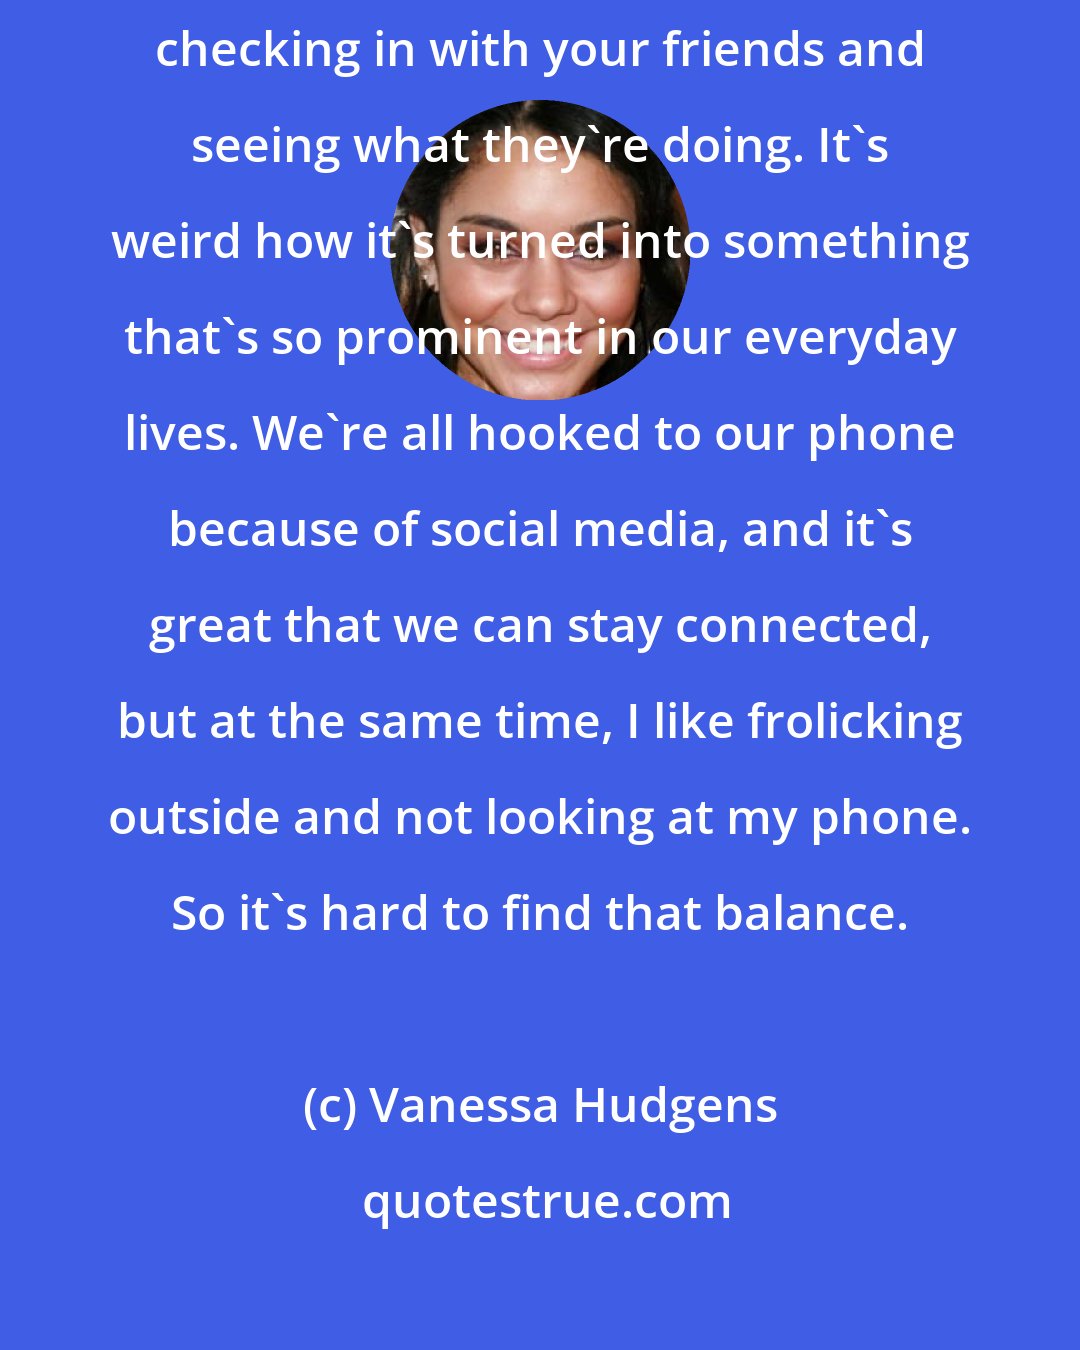 Vanessa Hudgens: Instagram was the first one I jumped on to, and I realized it's more about checking in with your friends and seeing what they're doing. It's weird how it's turned into something that's so prominent in our everyday lives. We're all hooked to our phone because of social media, and it's great that we can stay connected, but at the same time, I like frolicking outside and not looking at my phone. So it's hard to find that balance.